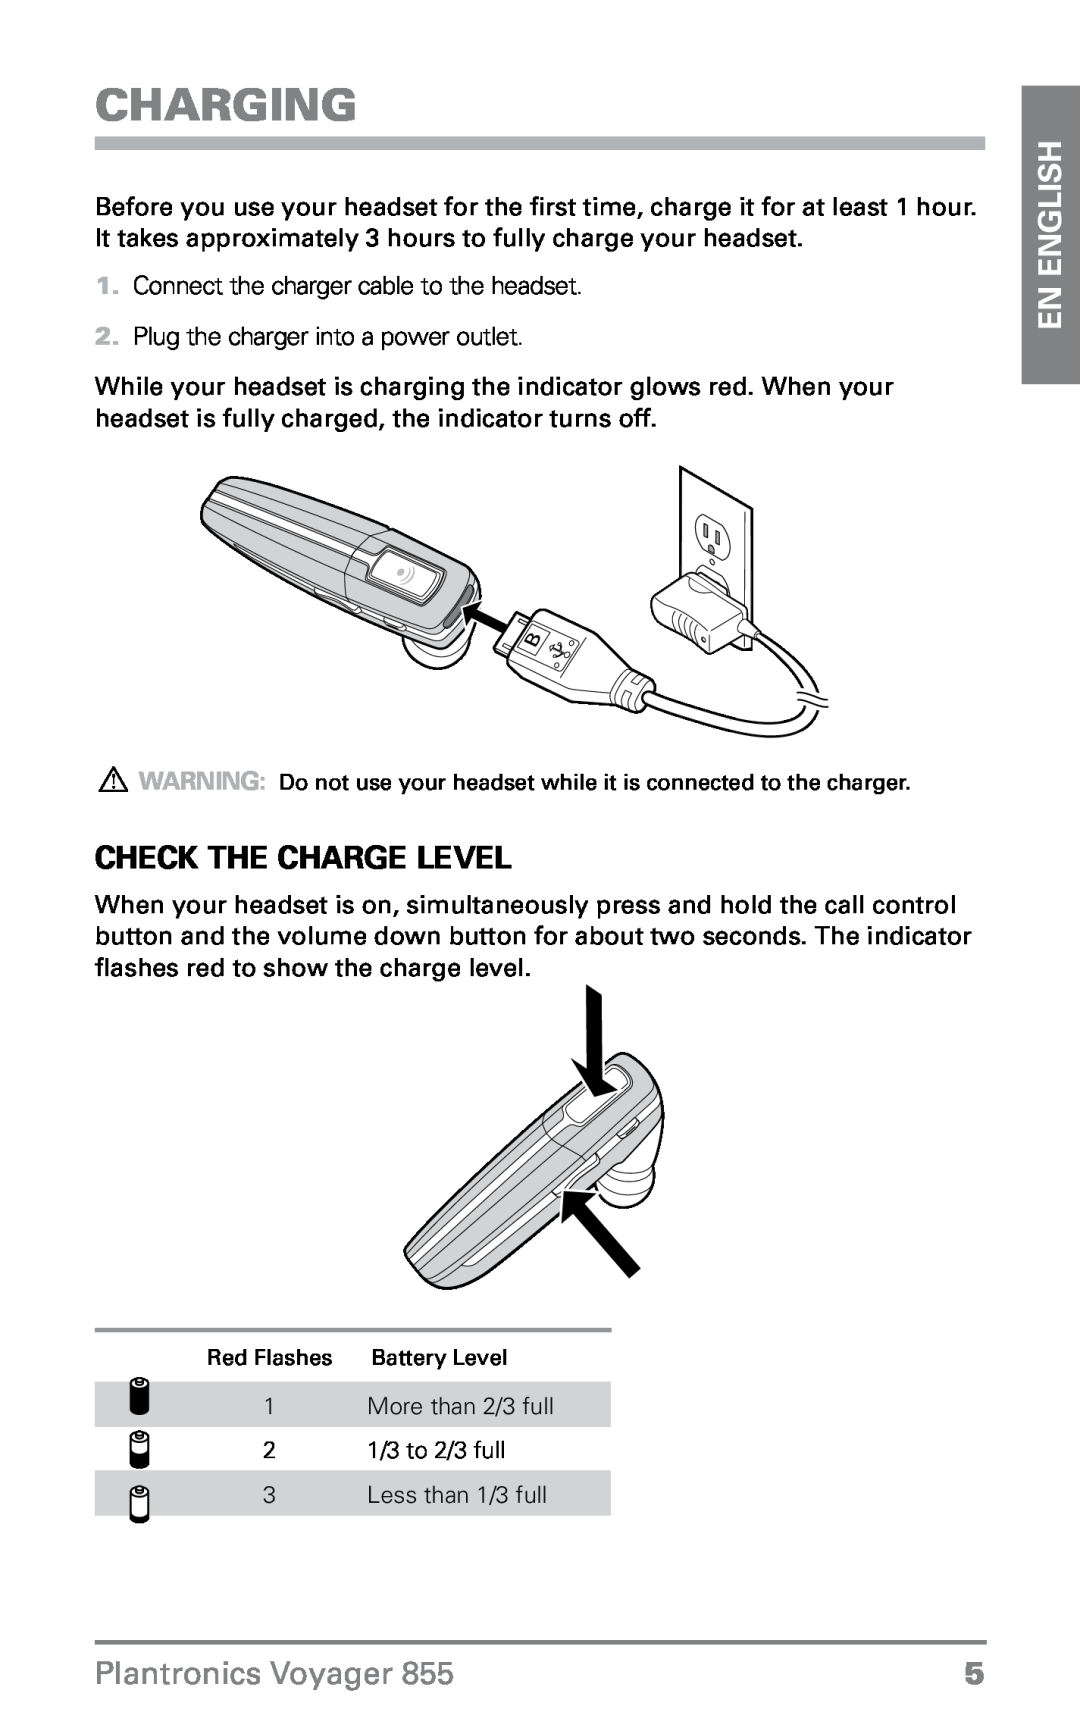 Plantronics VOYAGER855 manual Charging, Check the charge level, En English, Plantronics Voyager 